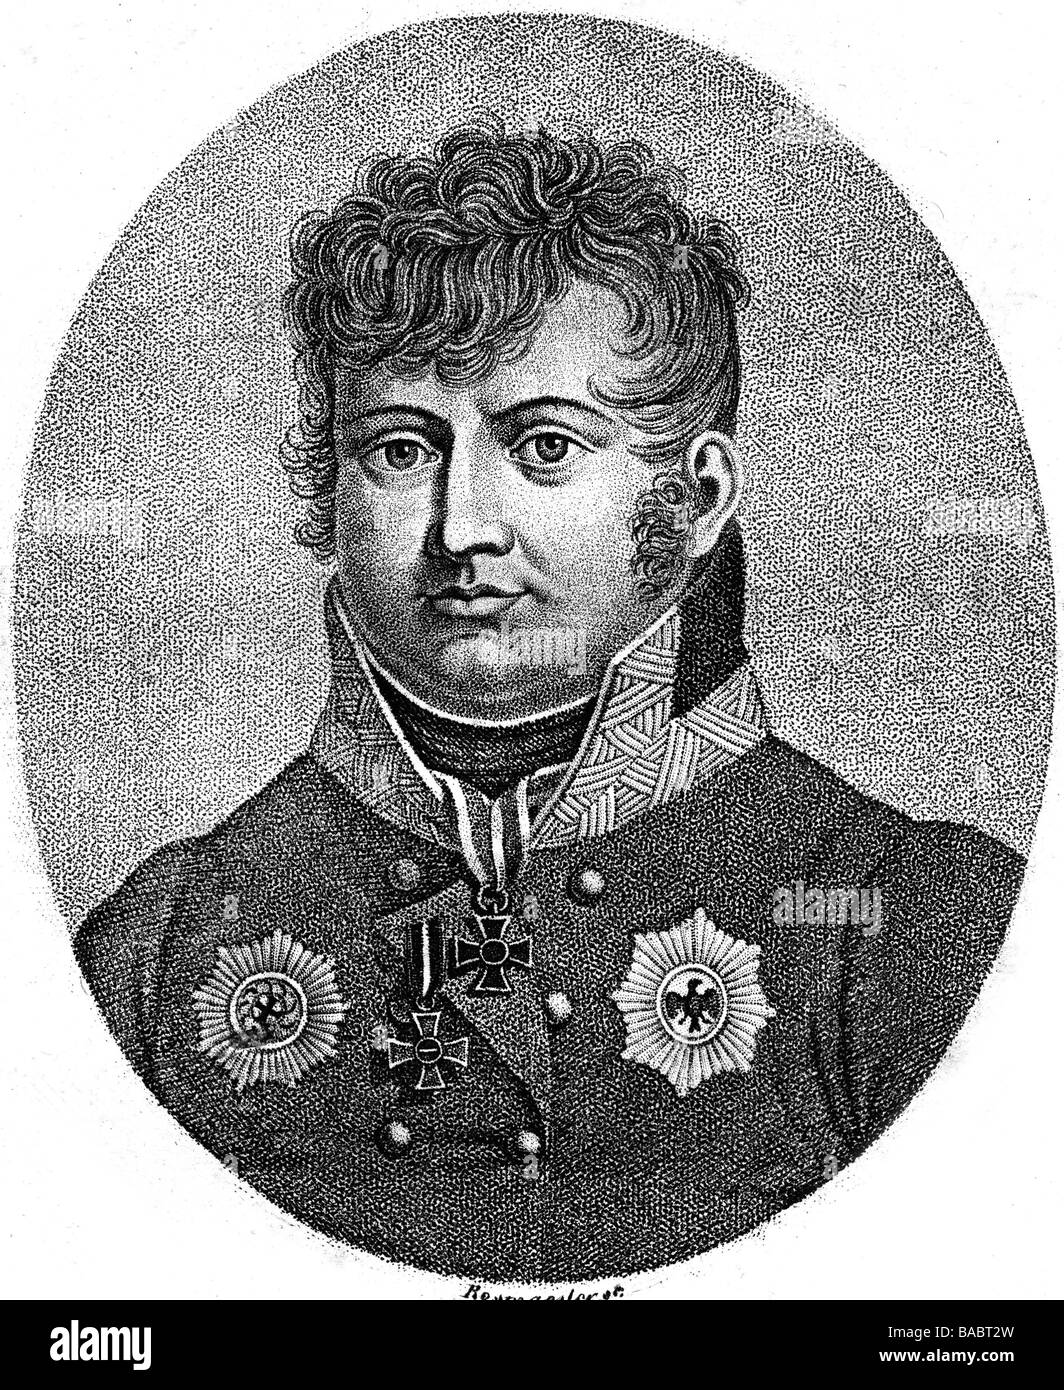 Bubna und Littiz, Ferdinand Count of, 26.11.1768 - 6.6.1825, Austrian general and diplomat, portrait, copper engraving by Rosmaesler, 19th century, , Artist's Copyright has not to be cleared Stock Photo